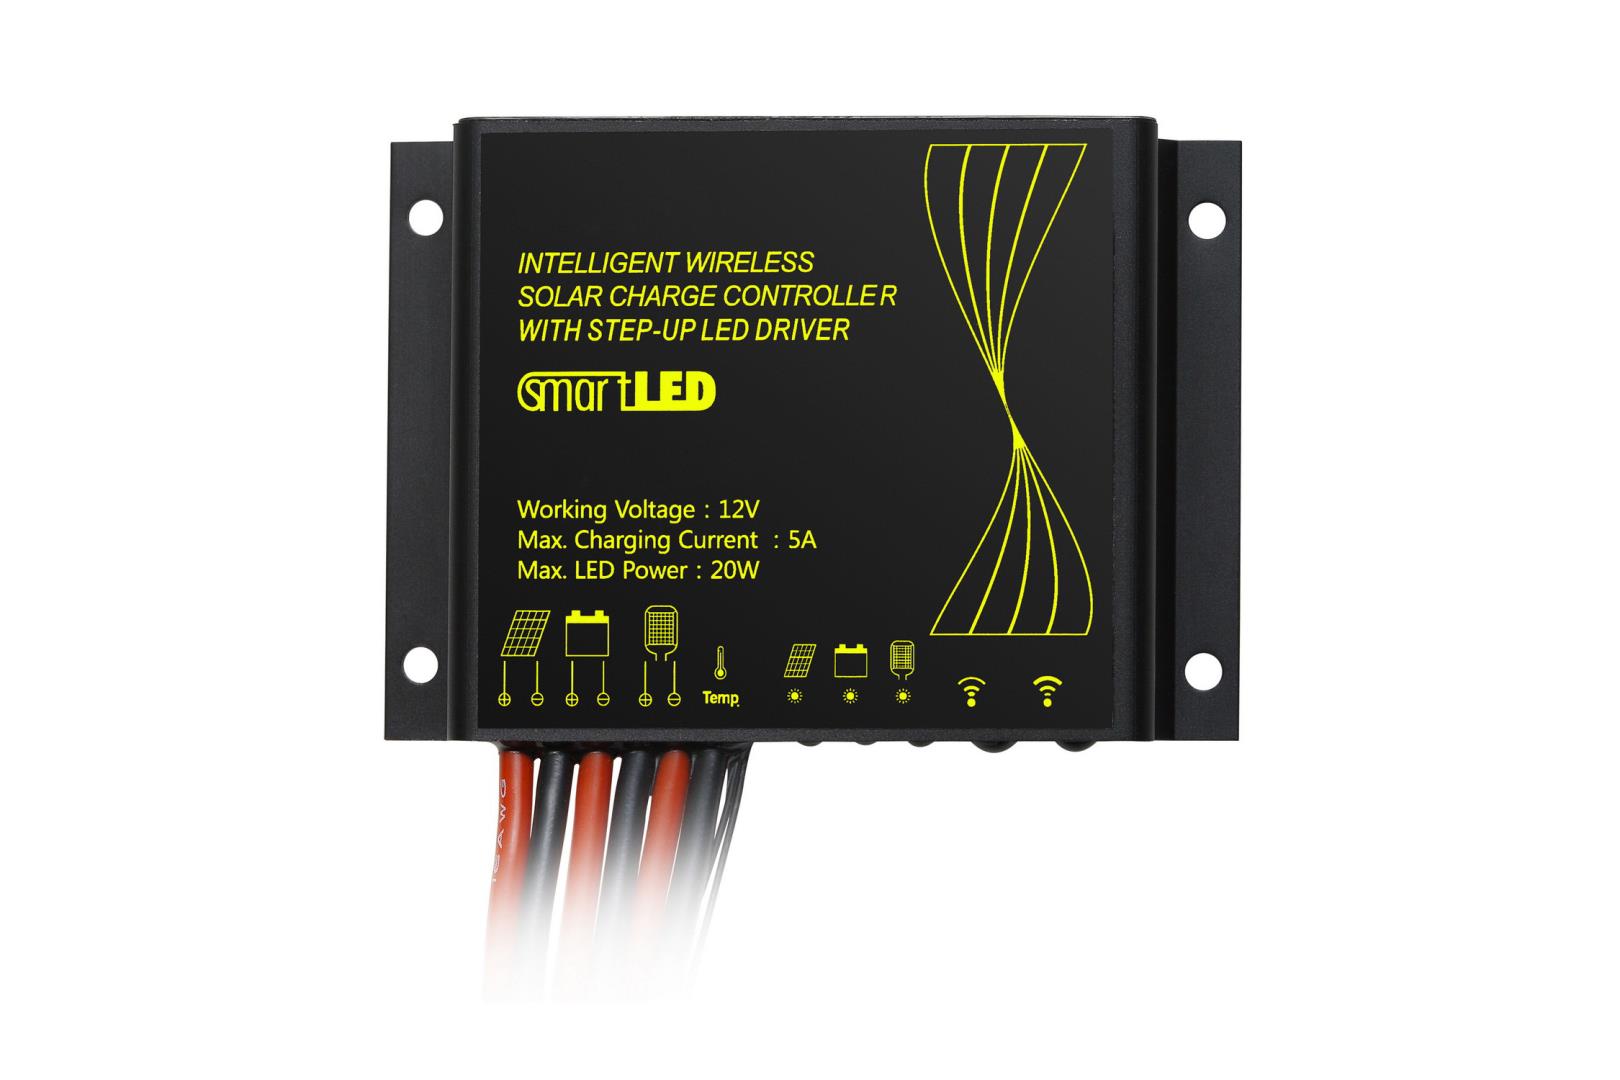 LED Street Lighting Solar Charge Controller BL-SDH series